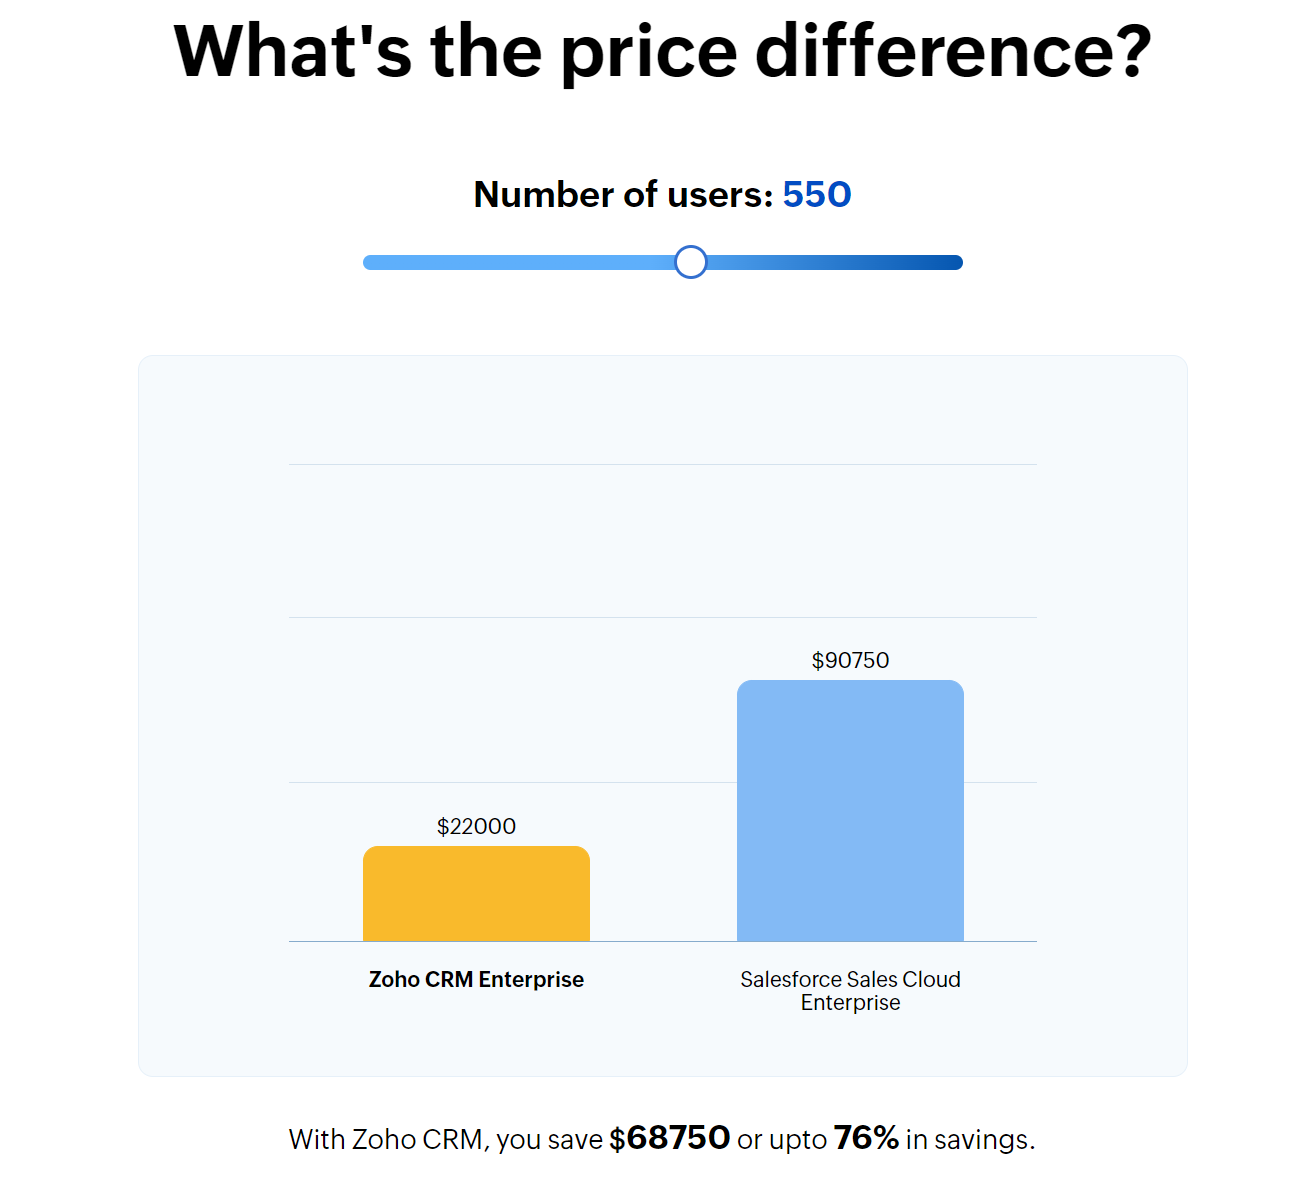 Zoho's CRM comparison pages include a pricing tool that shows how Zoho is cheaper than alternatives like Salesforce